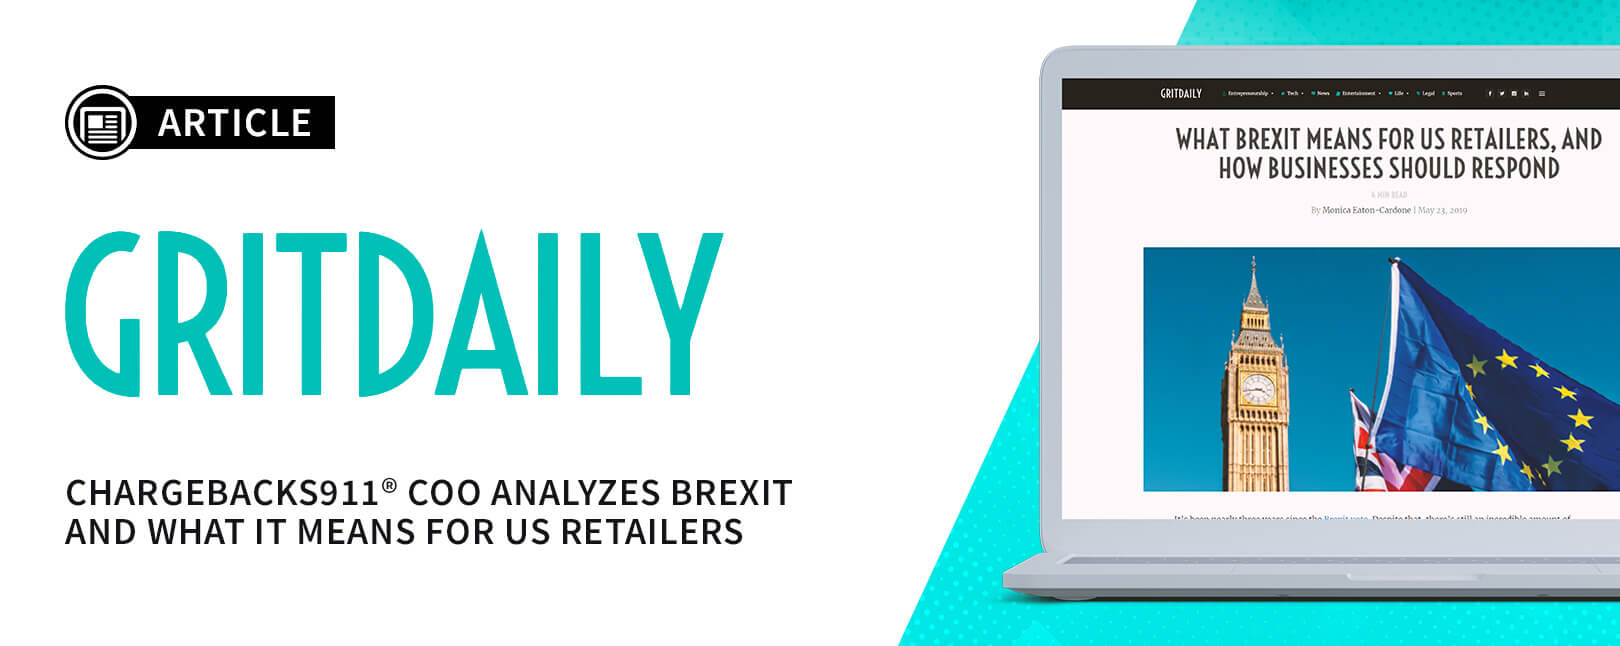 What Brexit Means for US Retailers, and How Businesses Should Respond